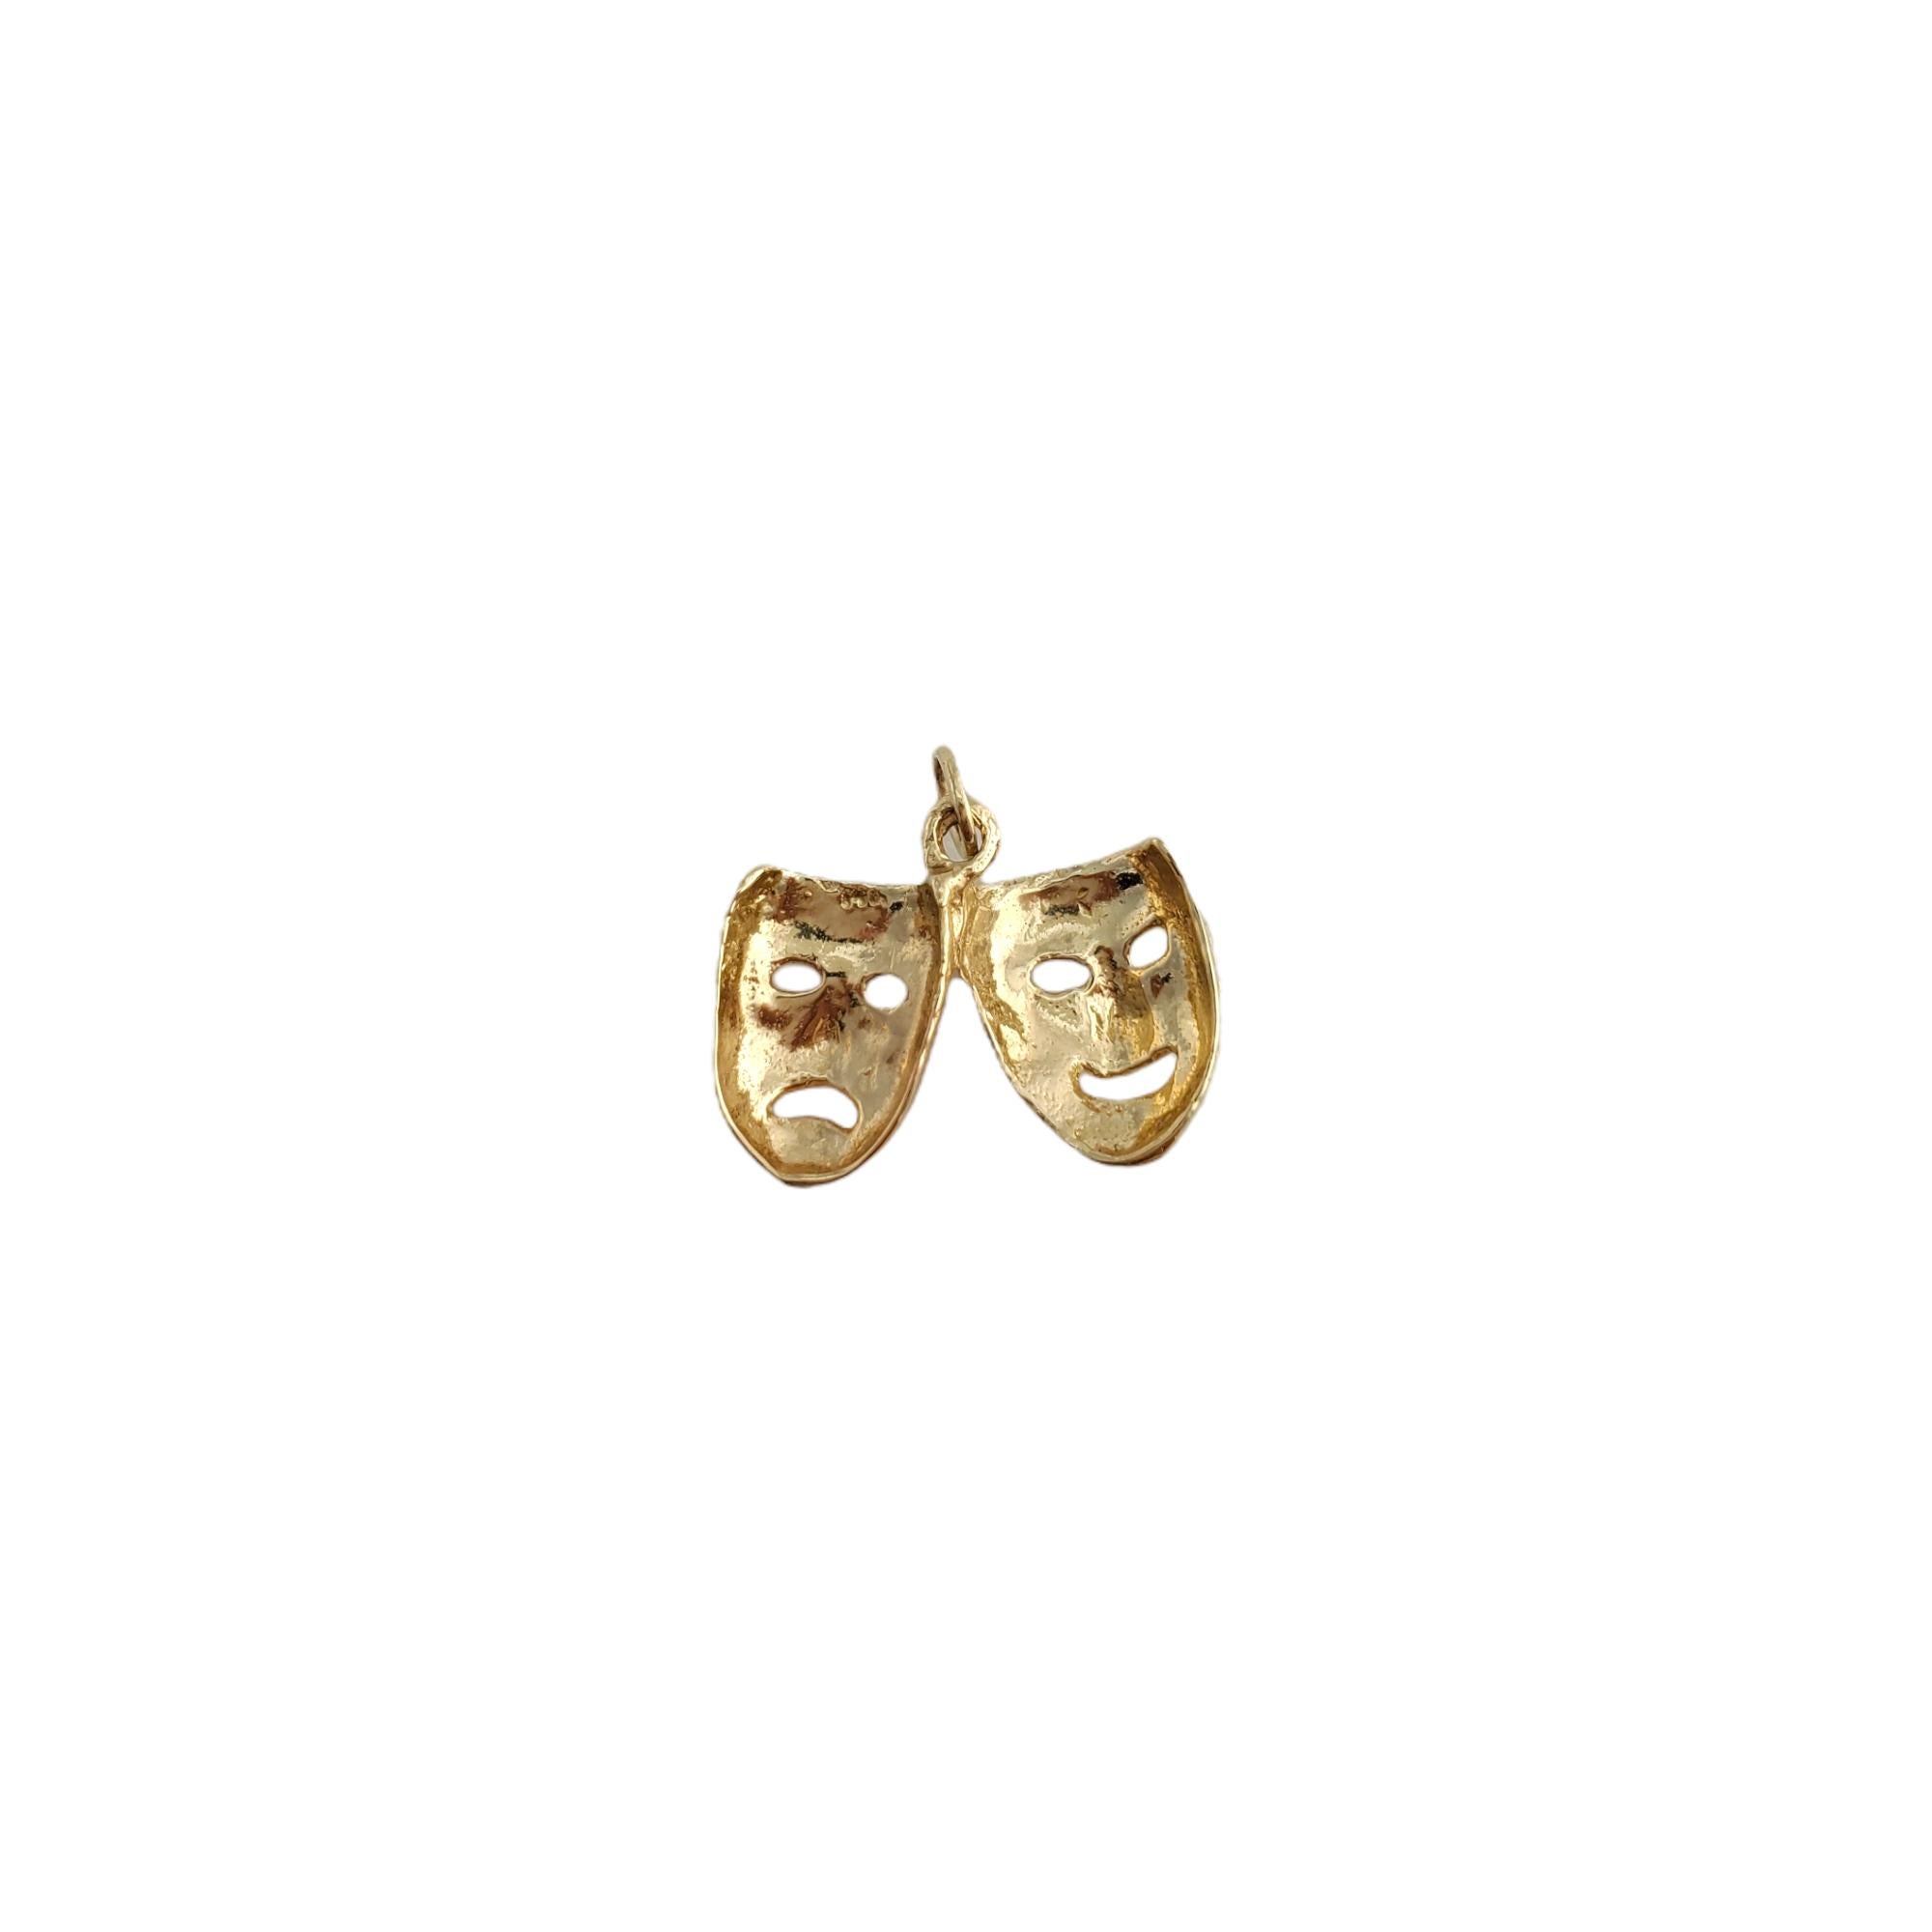 14K Yellow Gold Comedy & Tragedy Mask Charm

This is the perfect gift for the drama lover in your life!

This piece features a two-part charm with the comedy and tragedy face.

Size: 18.5 mm X 13.8 mm

Weight: 1.9 gr/ 1.2 dwt.

Hallmark: 14K

Very